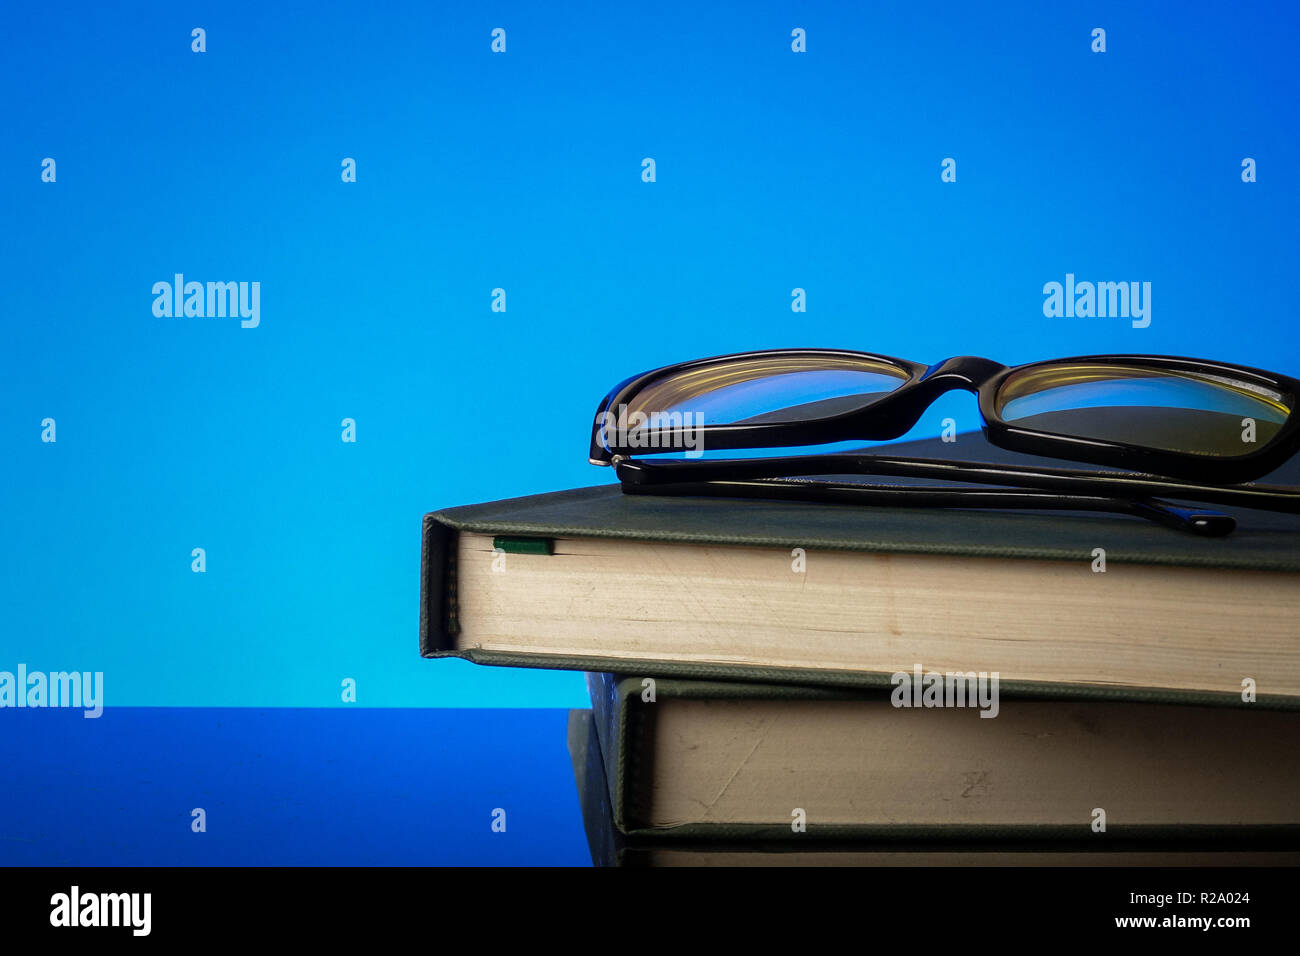 EDUCATION CONCEPT with stack of old book and reading glasses on a blue background. Stock Photo